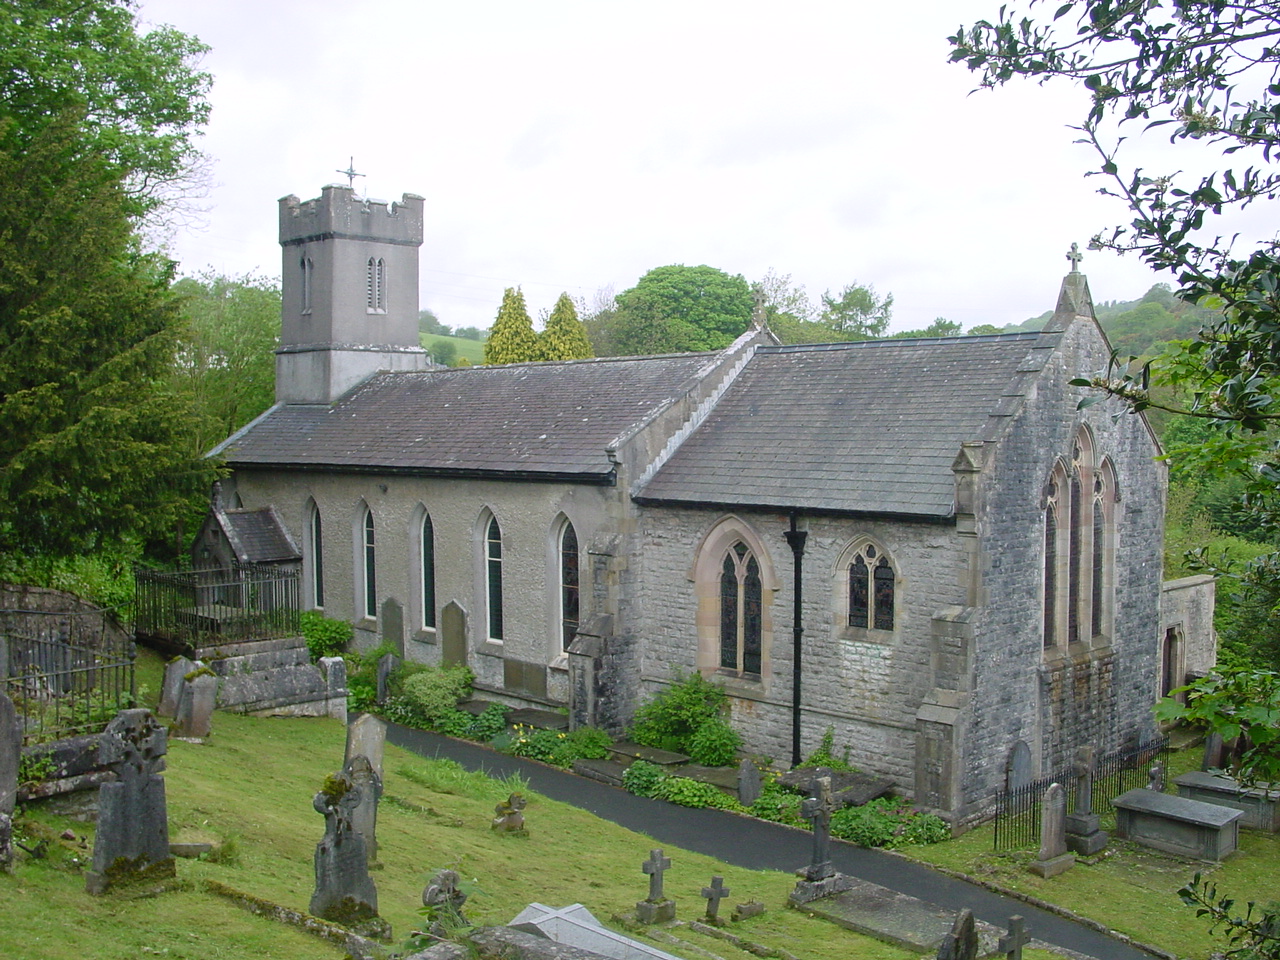 The Church of St Paul, Lindale